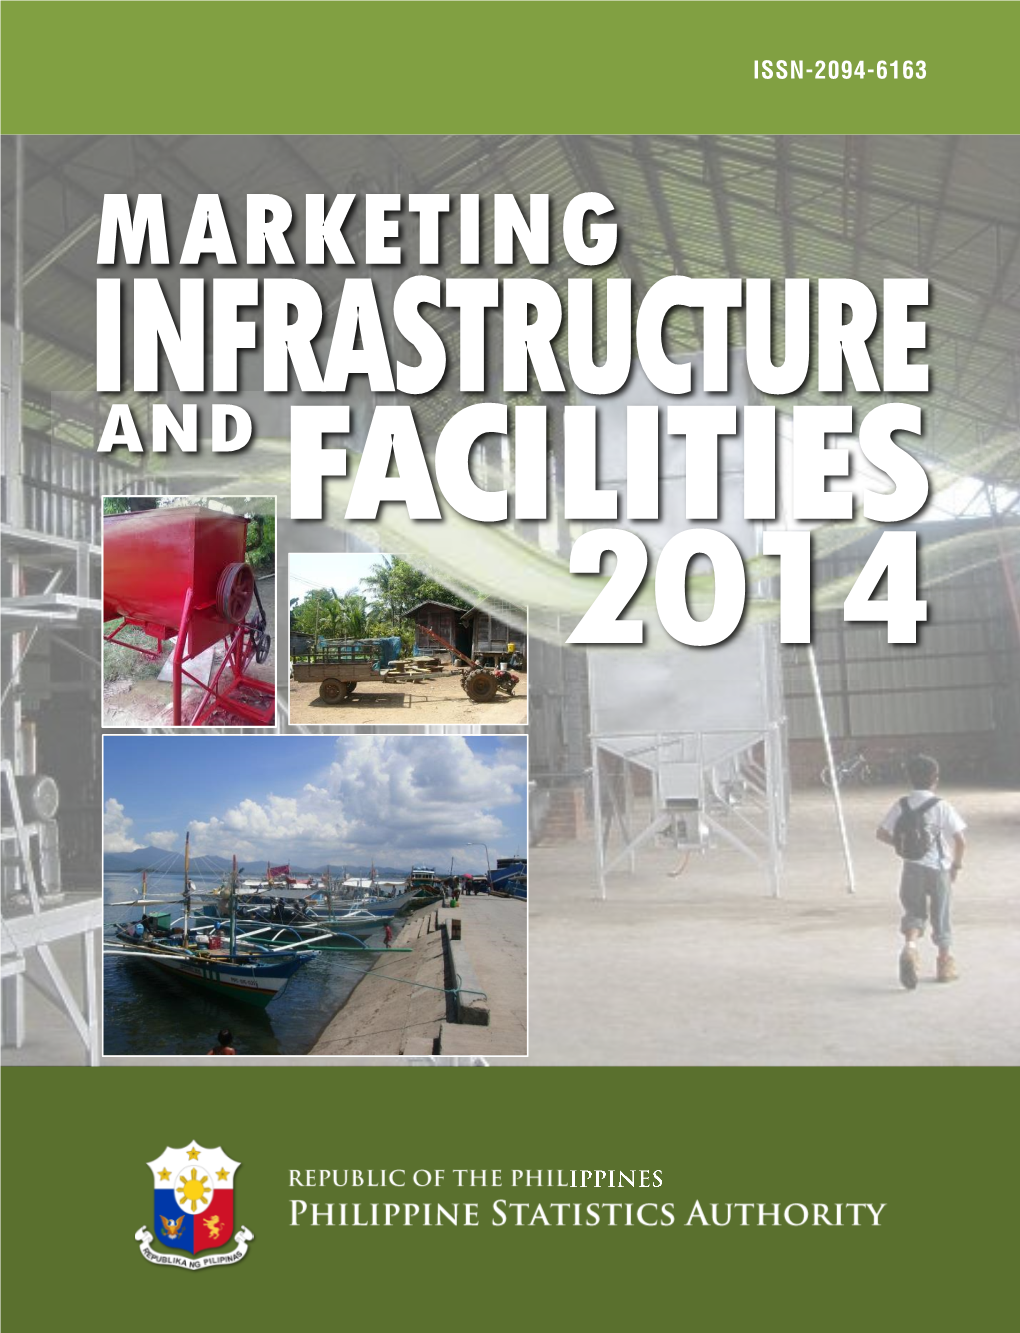 ISSN-2094-6163 PHILIPPINE STATISTICS AUTHORITY MARKETING INFRASTRUCTURE and FACILITIES 2014